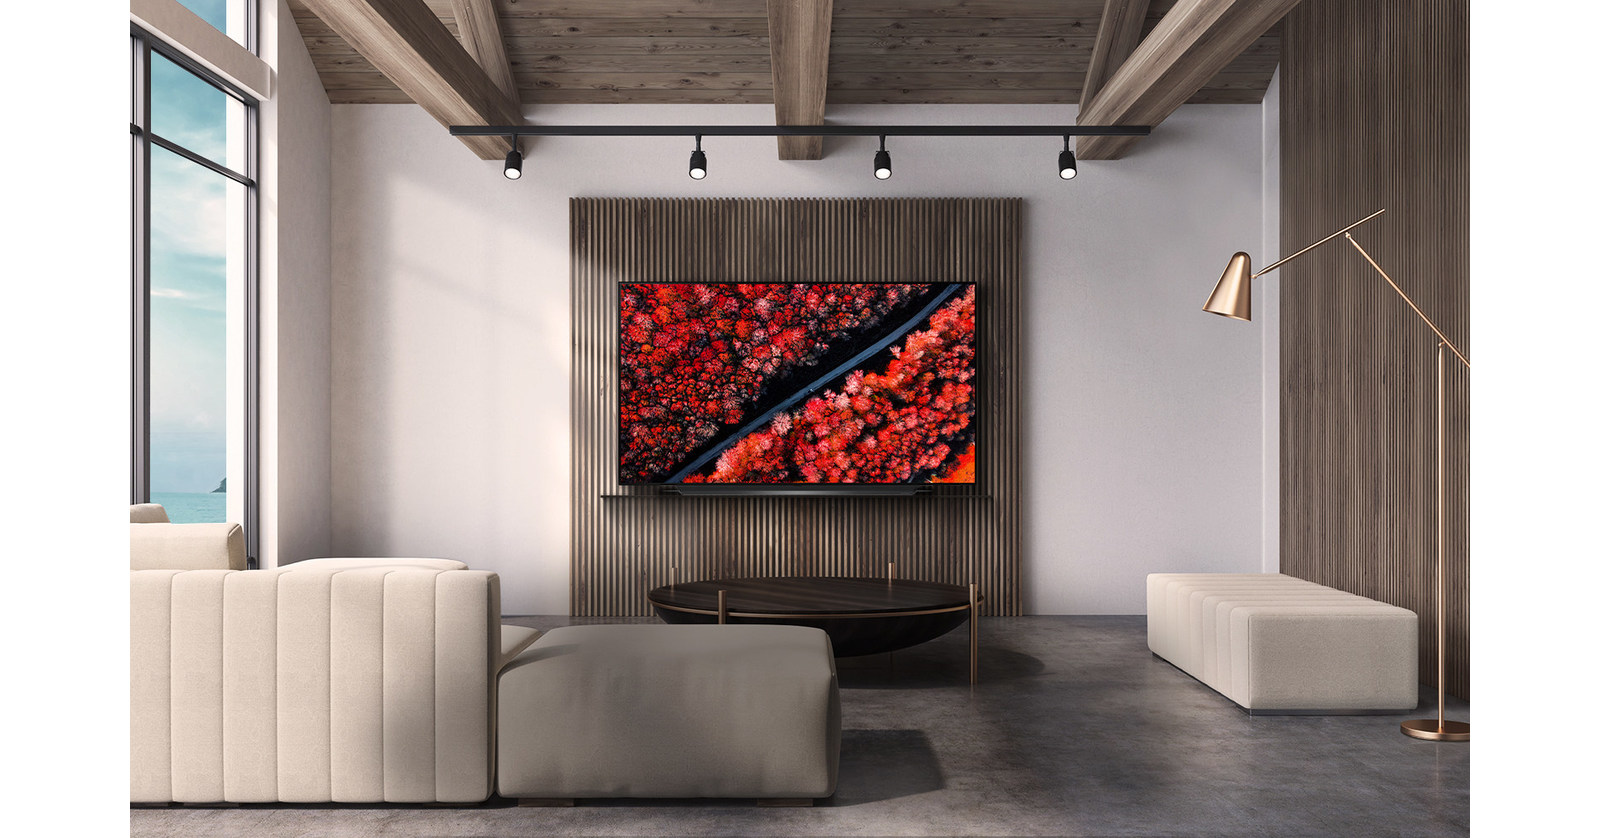 LG OLED TV Black Friday Deals: Lowest Prices Of The Year On Best TVs Of The Year